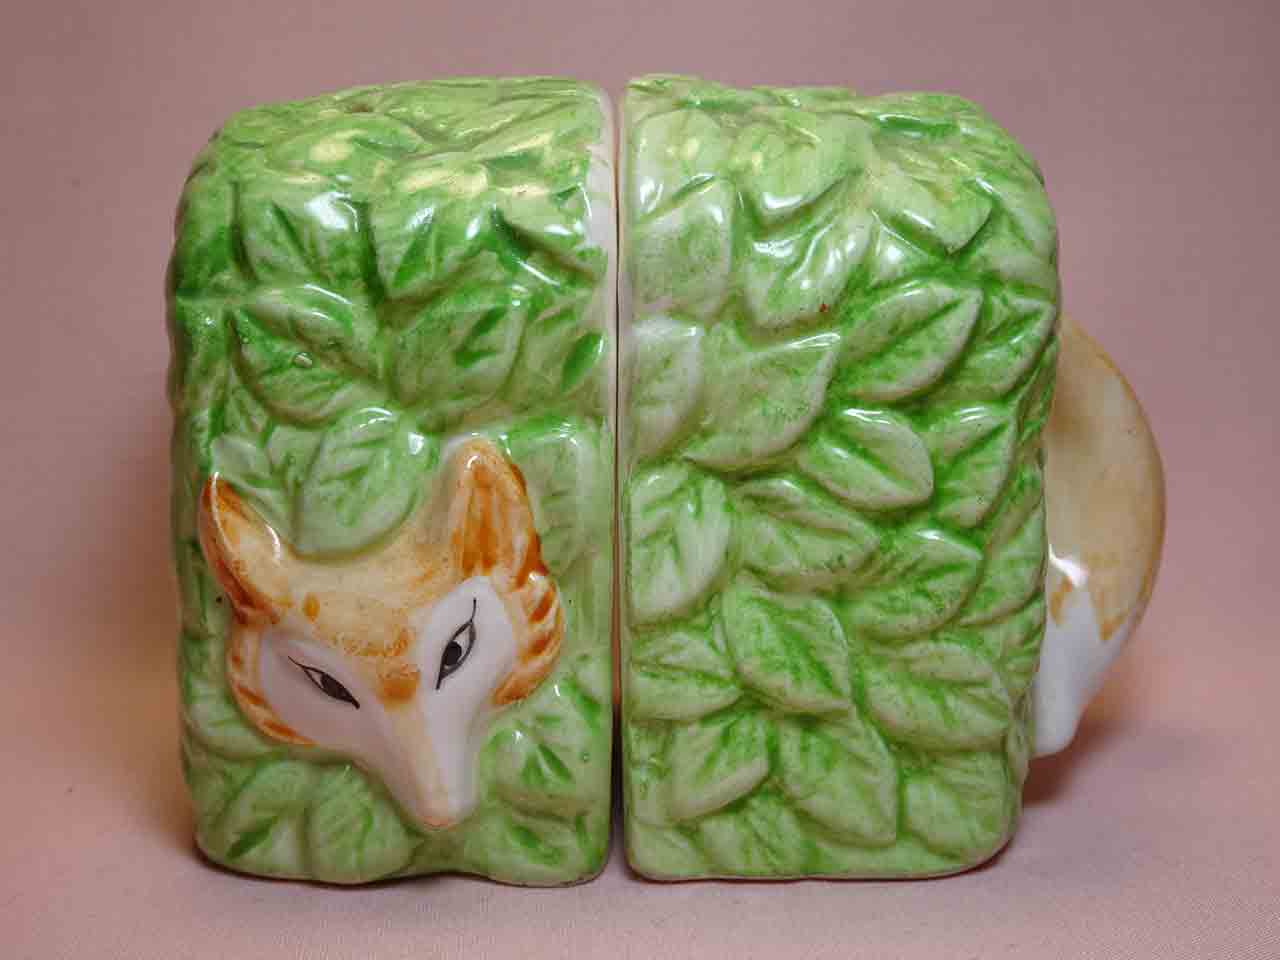 Aesop's Fable - The Fox and the Grapes - salt and pepper shakers